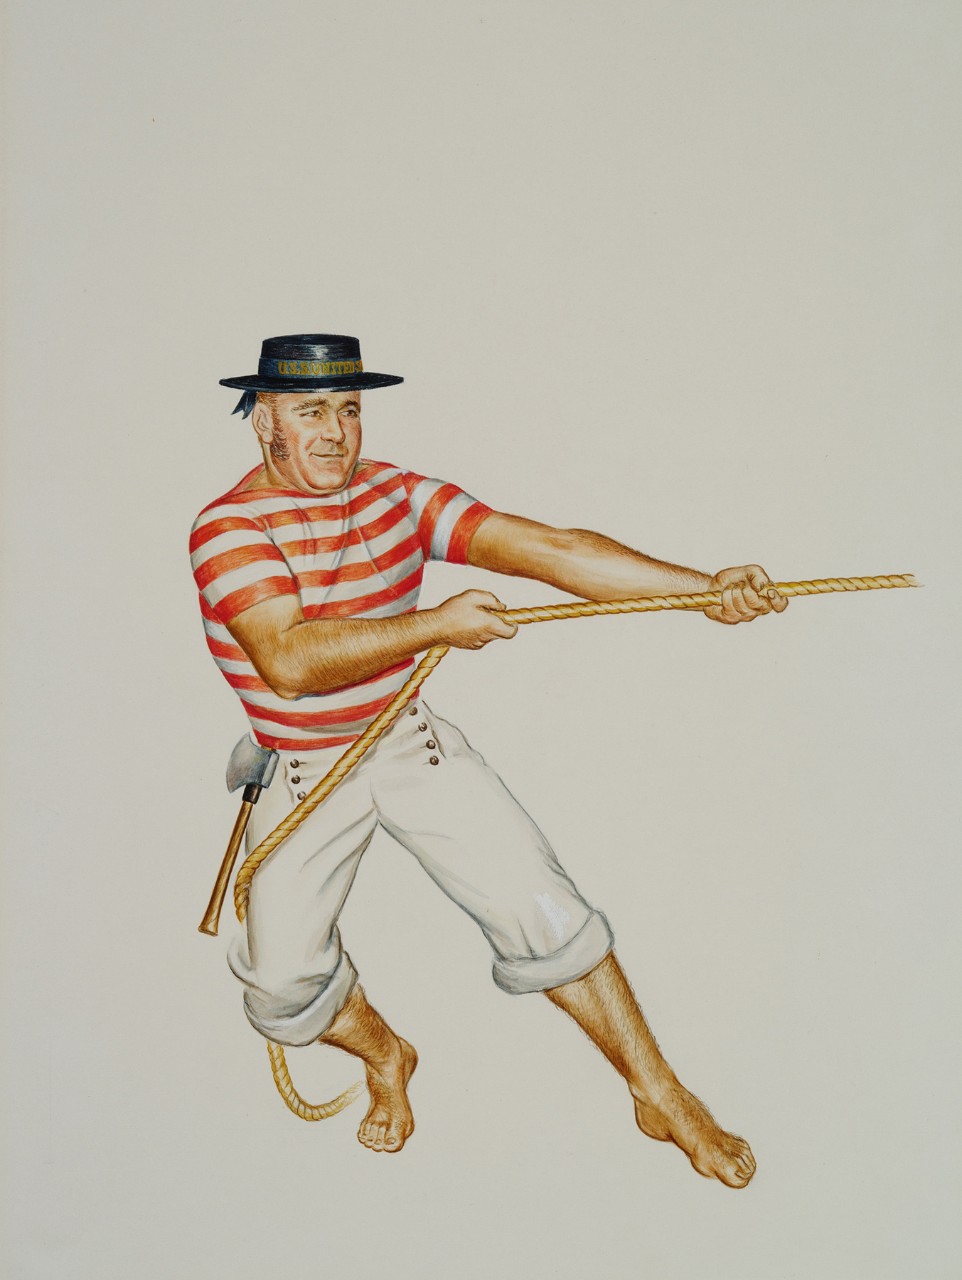 A sailor wearing a black hat, a red striped shirt and white pants rolled up to his knees. He is barefoot and he his pulling on a rope